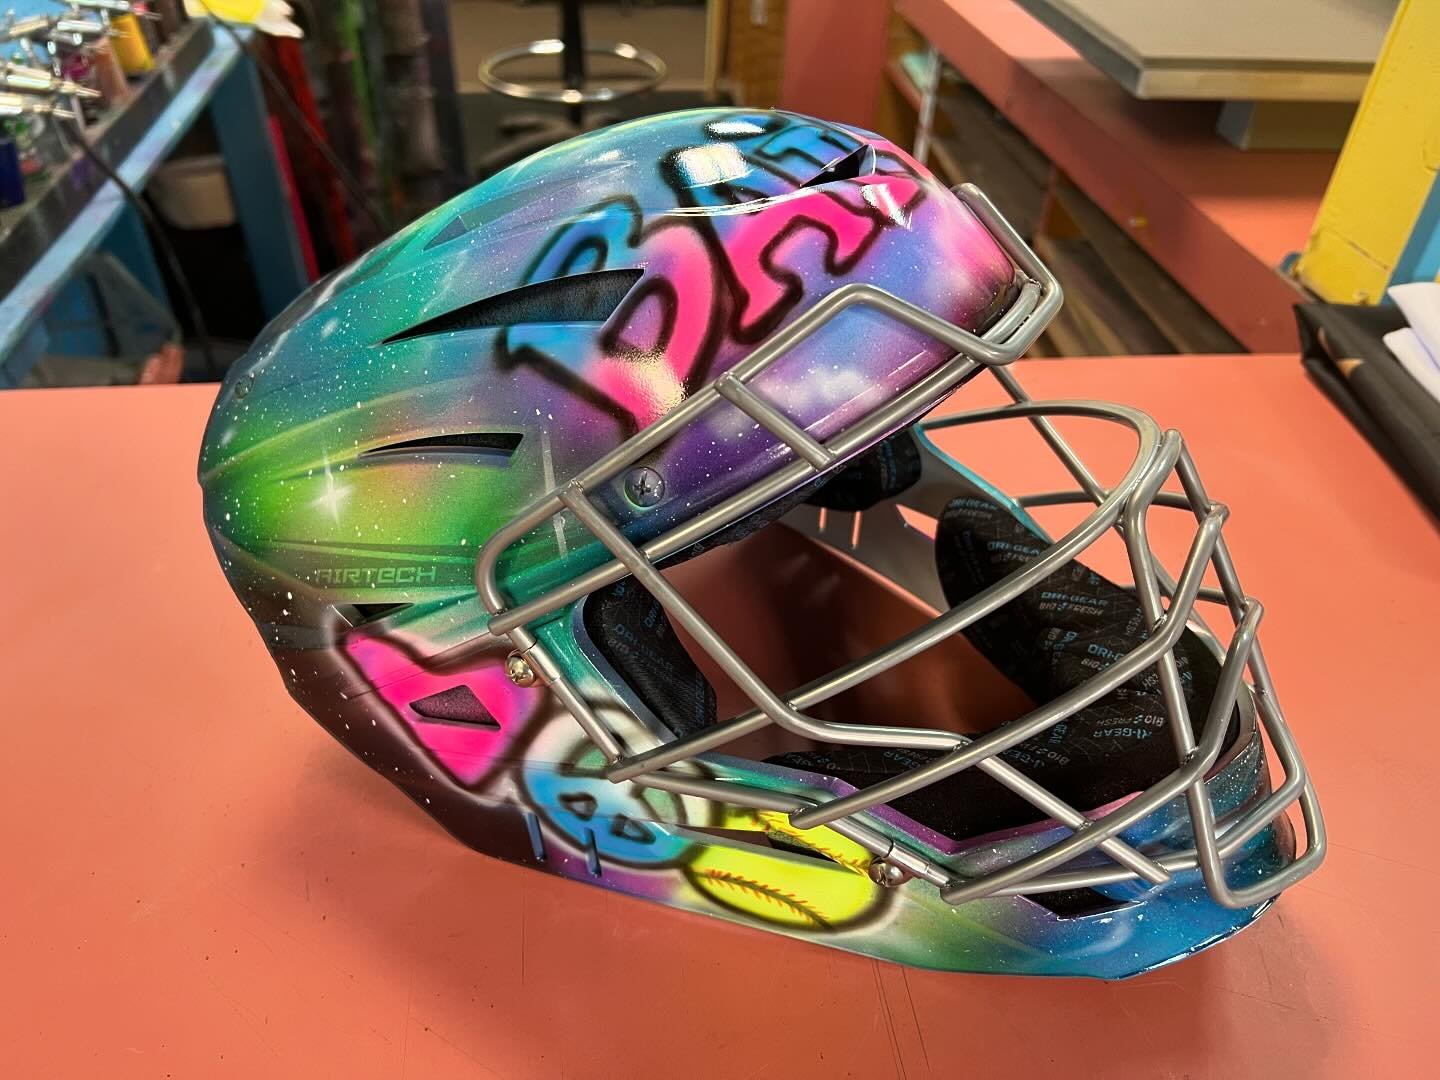 New catchers helmet just went out. Custom helmets are perfect for the softball/baseball player in your family. Get them now before the season is over.
.
.

#airbrush #airbrushart #airbrushedtshirts #tshirts #artists #cincinnati #softball #baseball #s